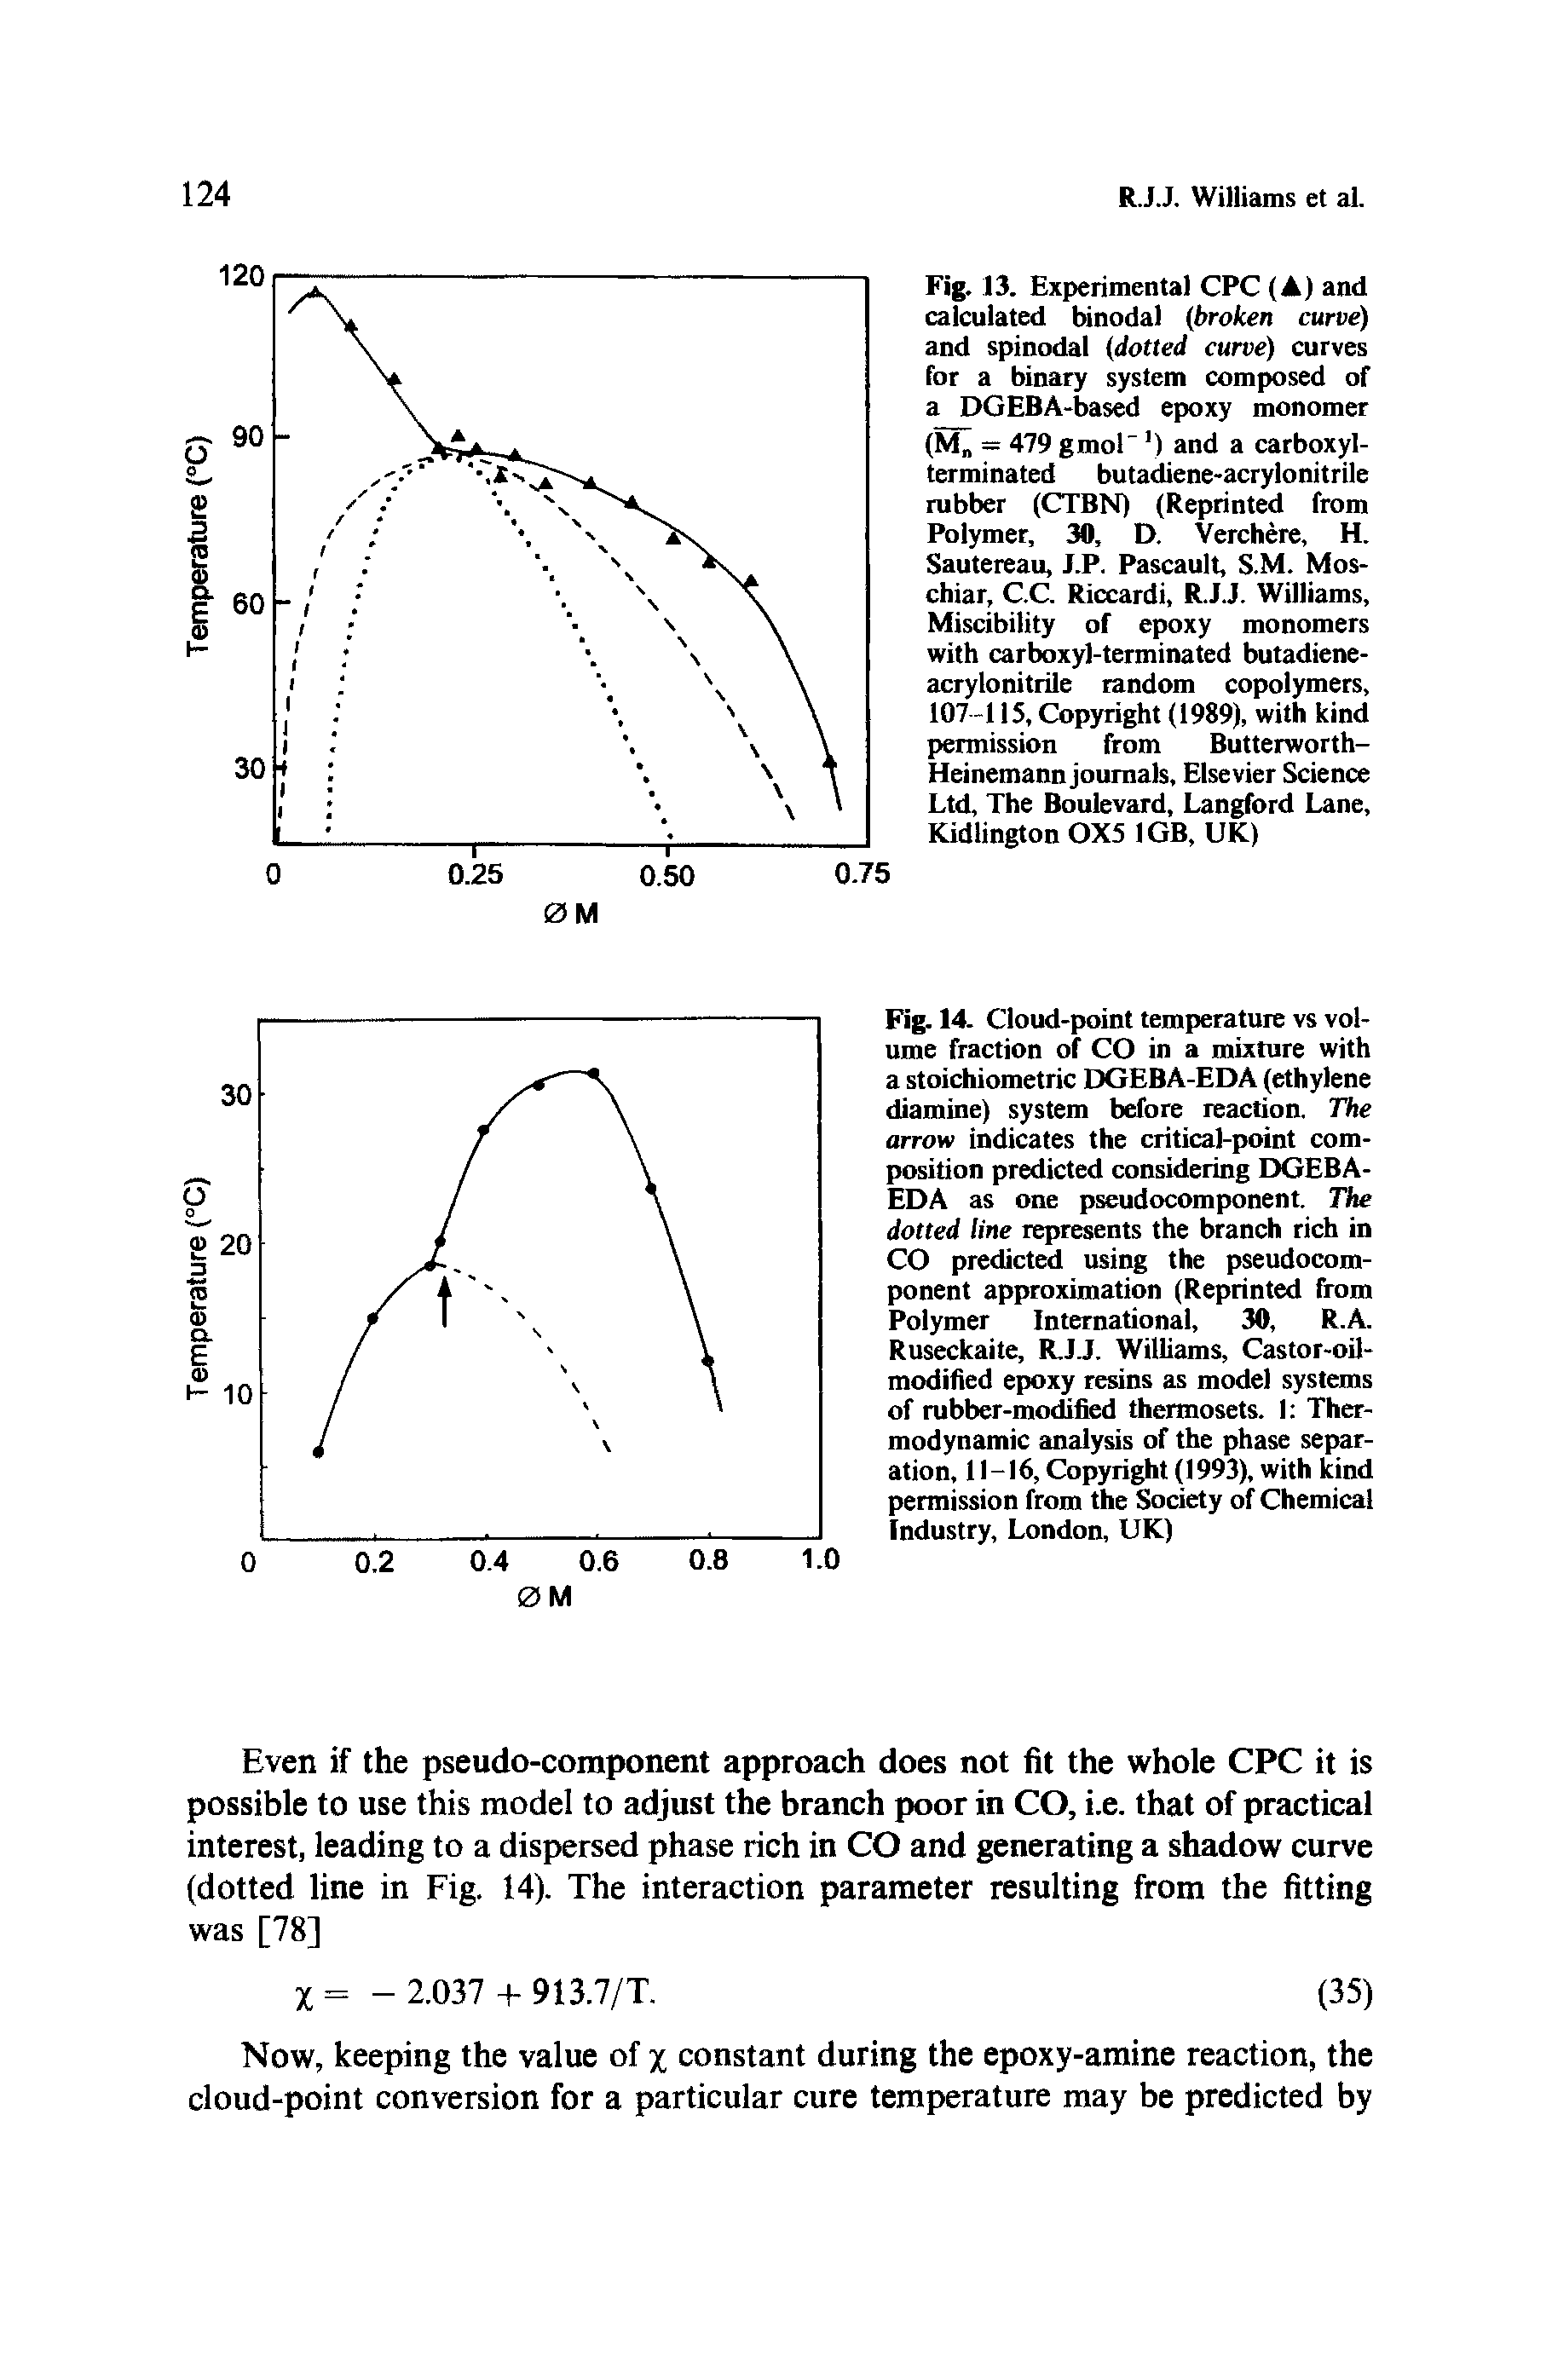 Fig. 13. Experimental CPC (A) and calculated binodal (broken curve) and spinodal (dotted curve) curves for a binary system composed of a DGEBA-based epoxy monomer (M = 479 gmol ) and a carboxyl-terminated butadiene-acrylonitrile rubber (CTBN) (Reprinted from Polymer, 30, D. Verchere, H. Sautereau, J.P. Pascault, S.M. Mos-chiar, C.C. Riccardi, R.J.J. Williams, Miscibility of epoxy monomers with carboxyl-terminated butadiene-acrylonitrile random copolymers, 107 -115, Copyright (1989), with kind permission from Butterworth-Heinemann journals, Elsevier Science Ltd, The Boulevard, Langford Lane, Kidlington 0X5 1GB, UK)...